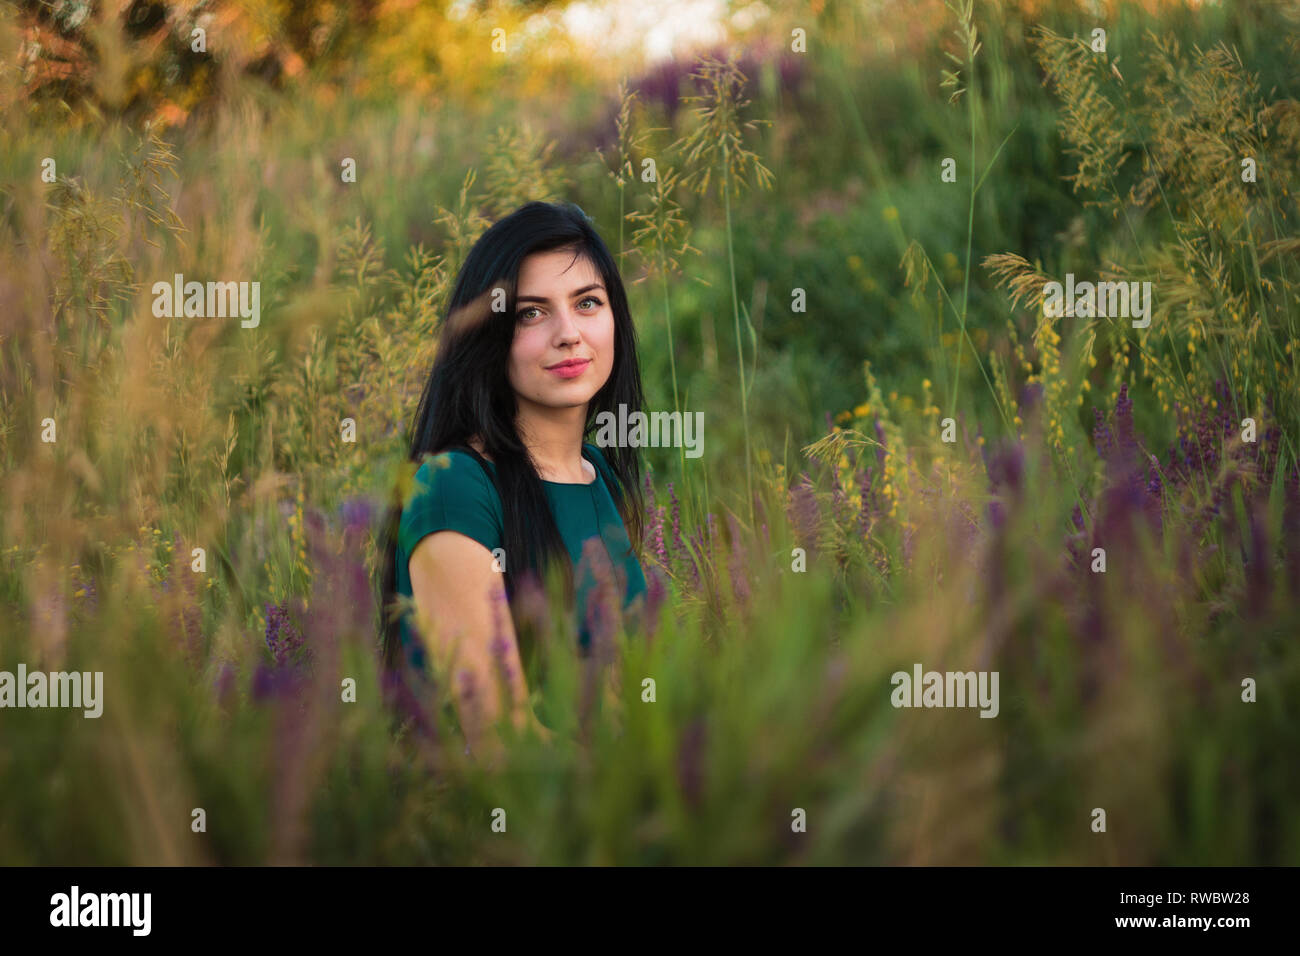 Beautiful young girl with black hair and green eyes sitting in the grass and violet flowers on green background in Dnipropetrovsk region, Ukraine Stock Photo